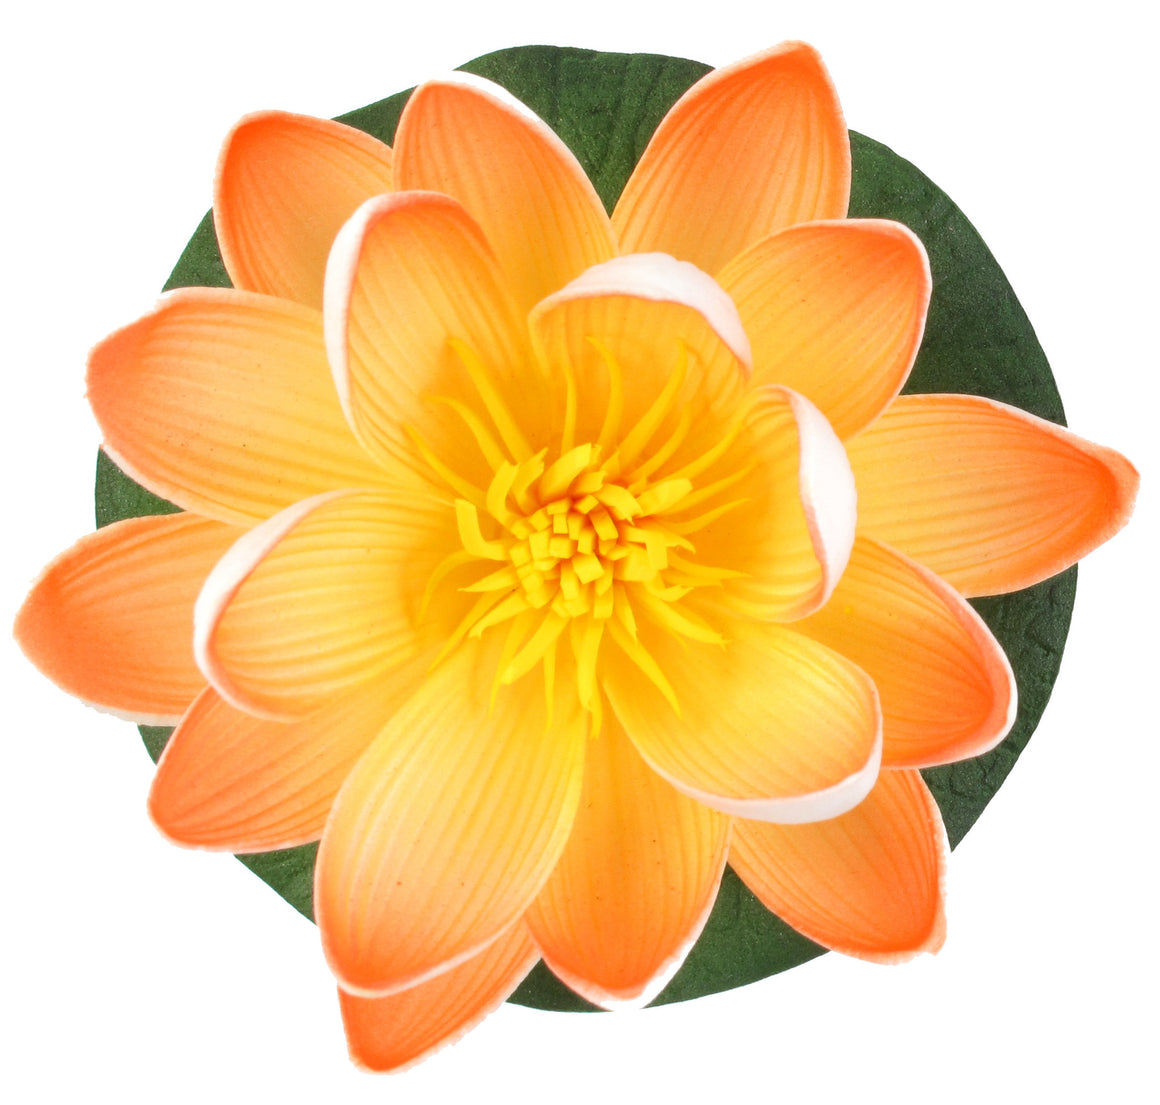 Small Floating Foam Water Lily Flower, For Small Water Feature, Approx. 3.25" x 3.25" x 2", Orange - TropicaZona